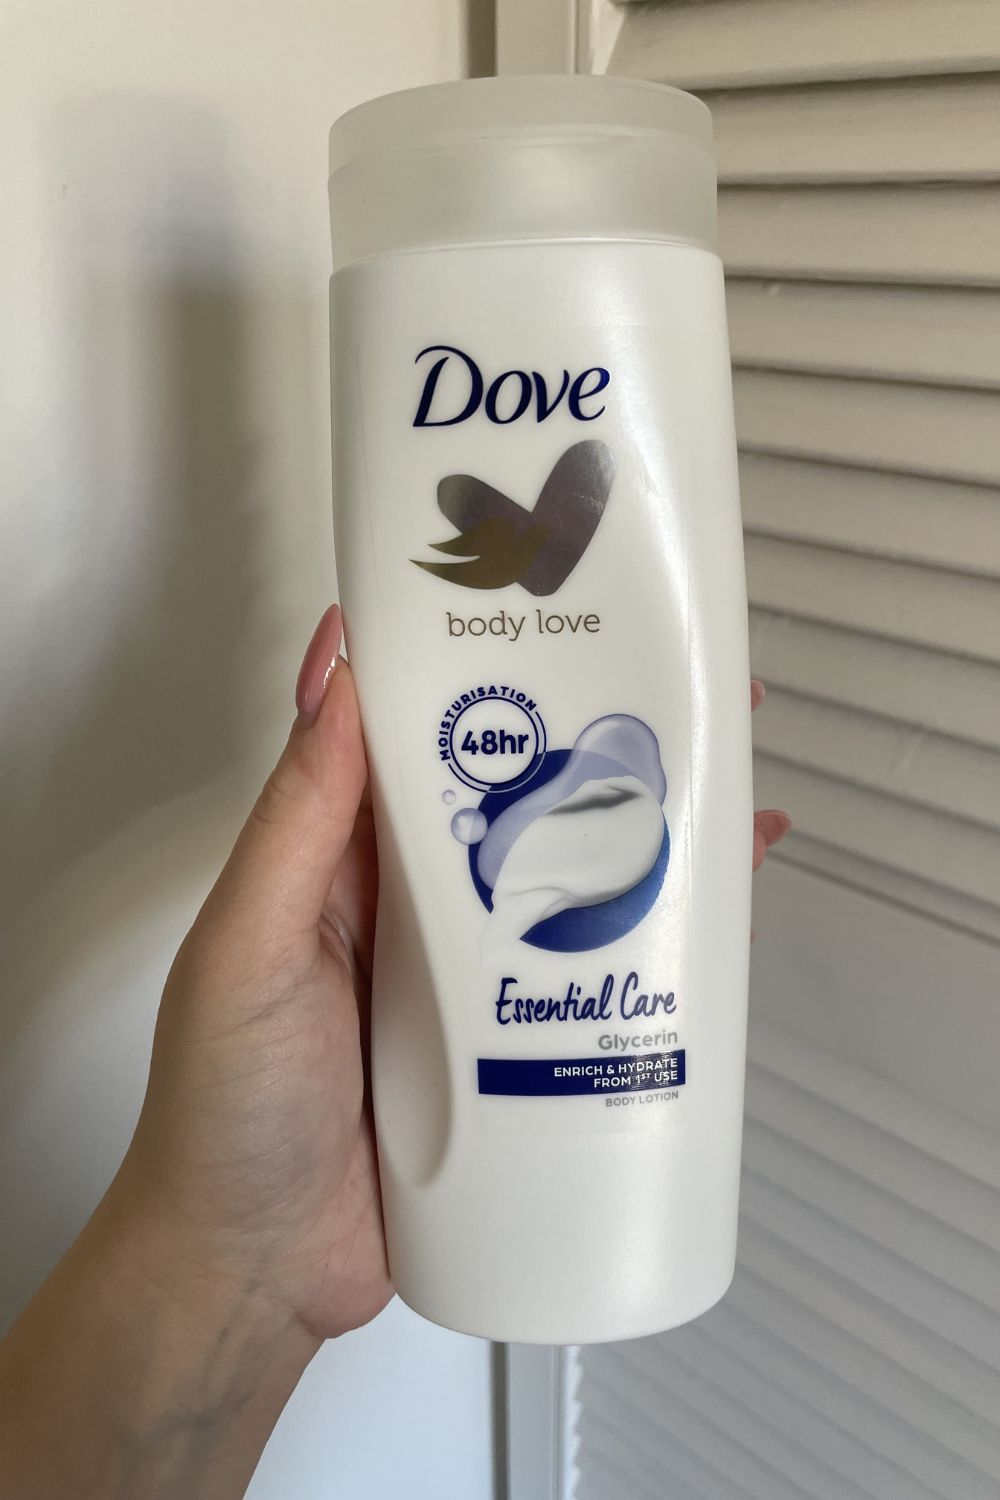 valeza holding the Dove Essential Care body lotion